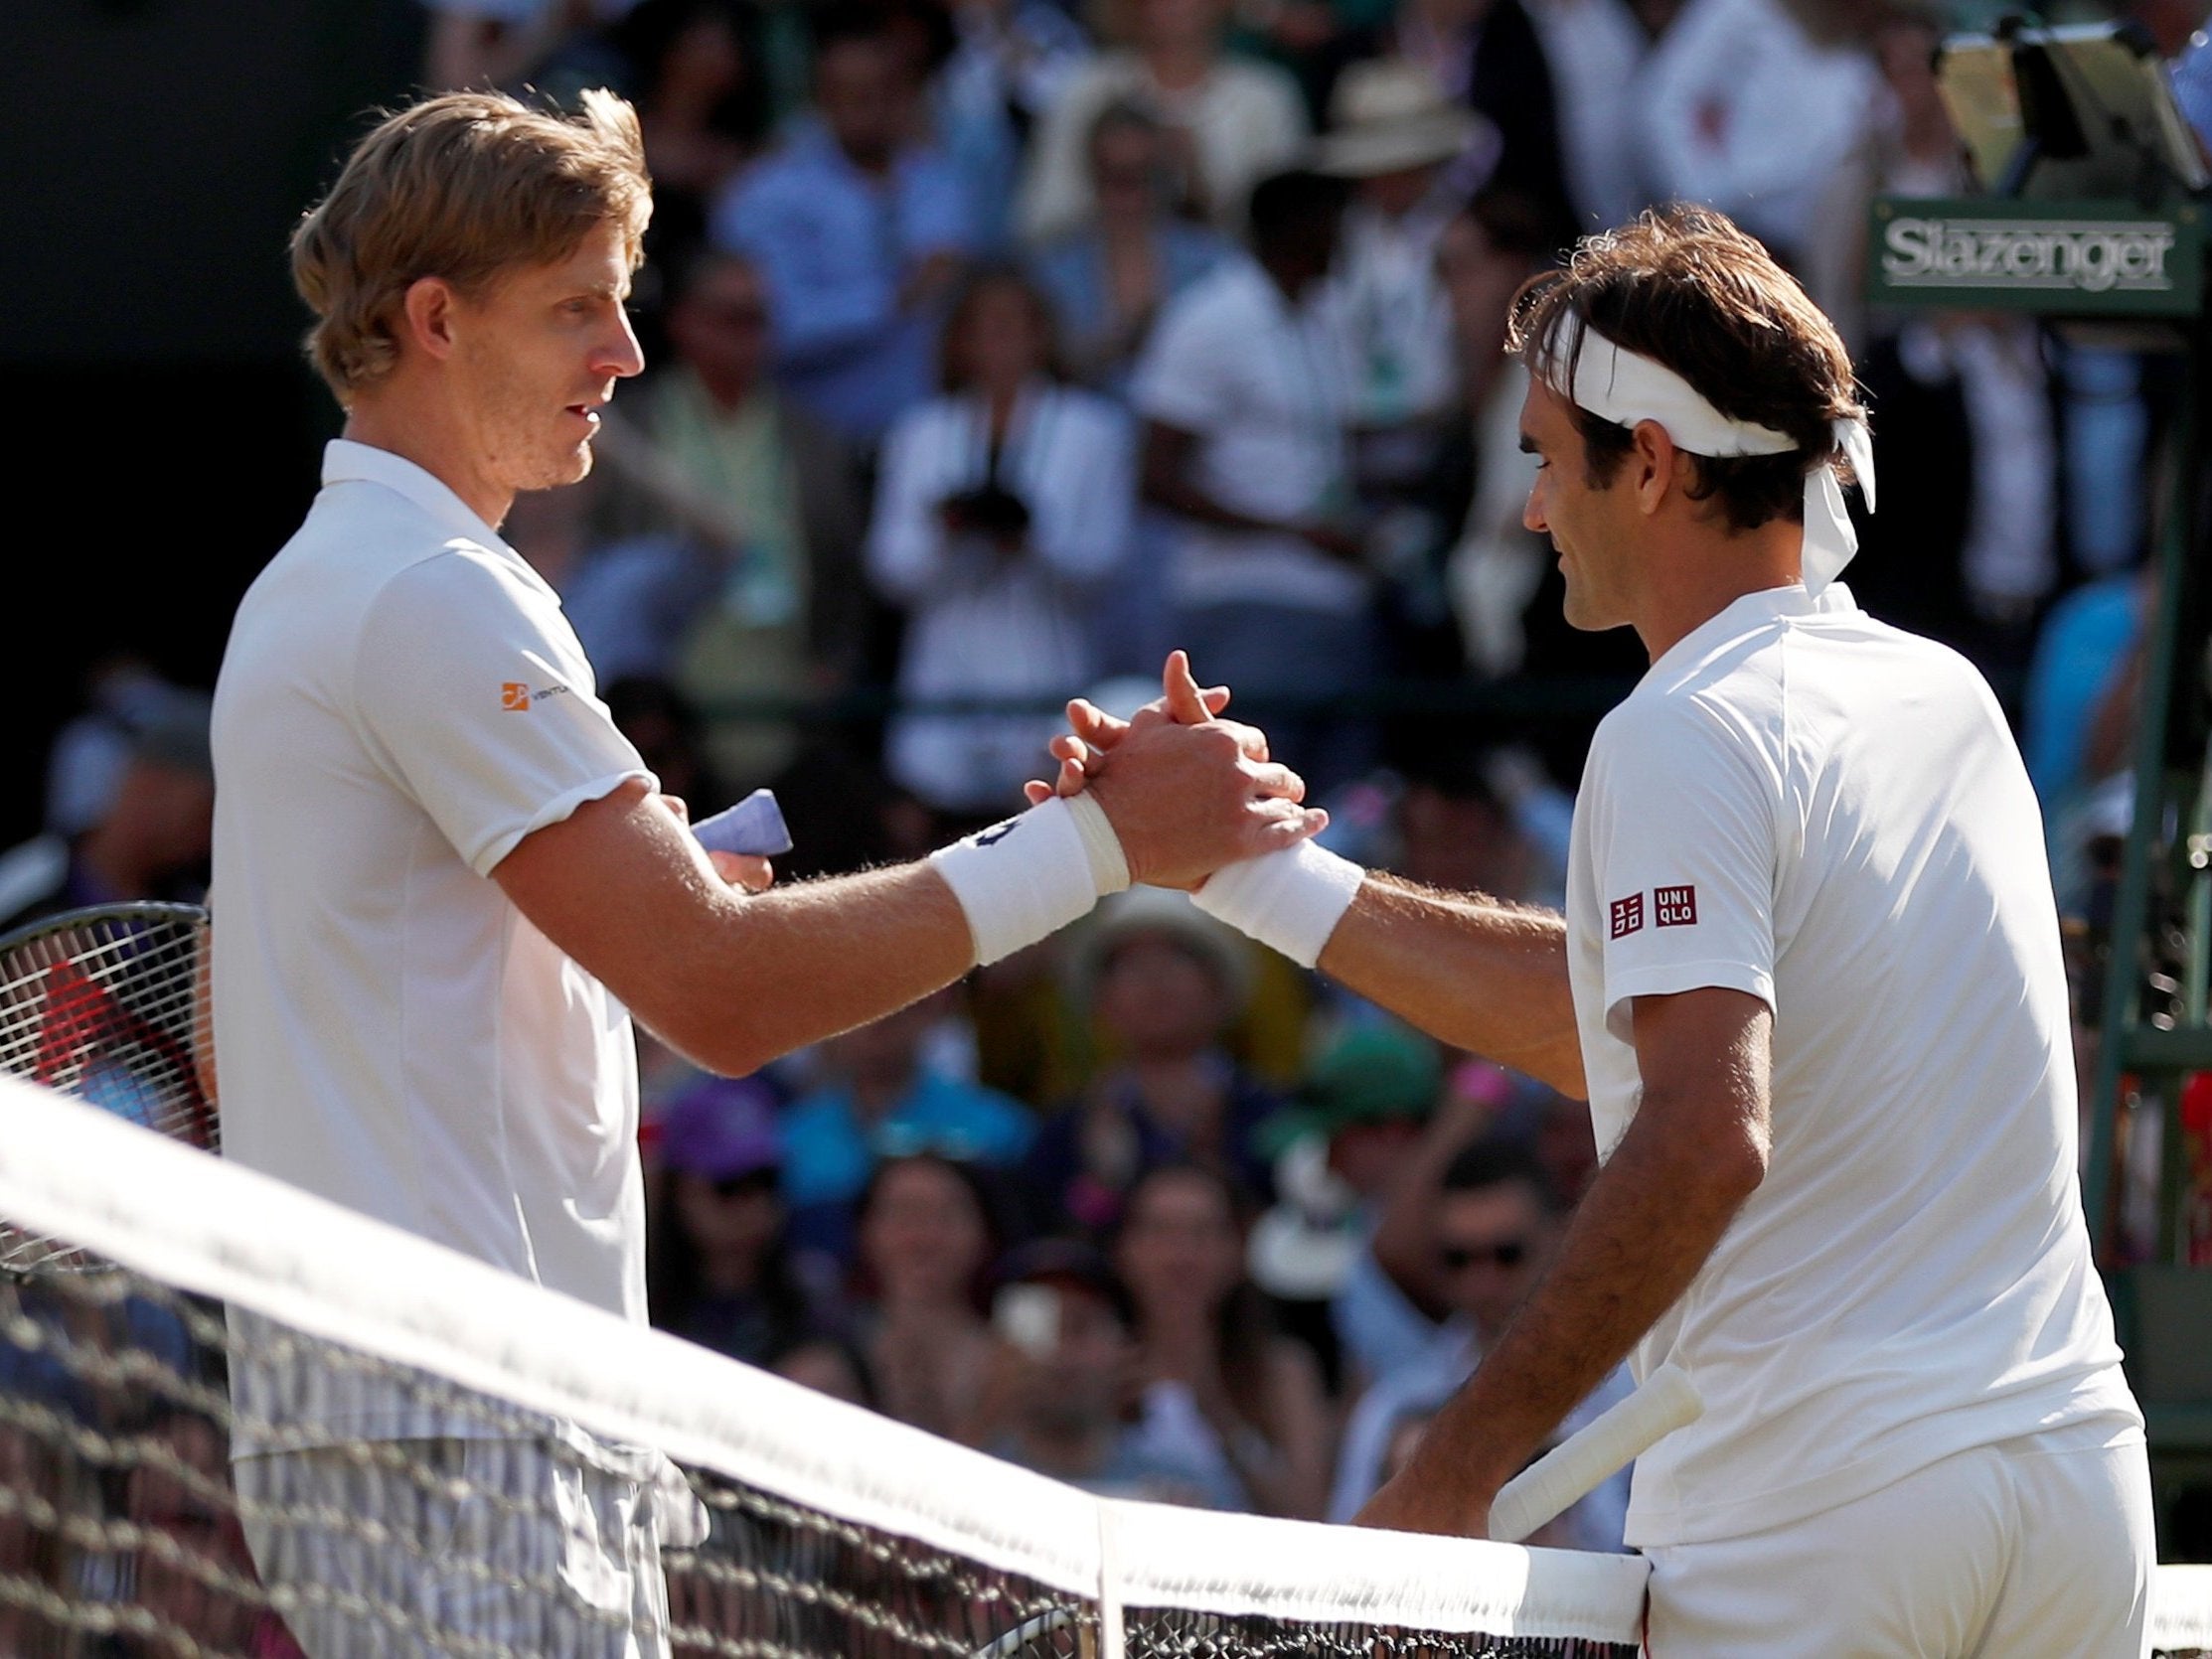 Kevin Anderson beat Roger Federer to reach the